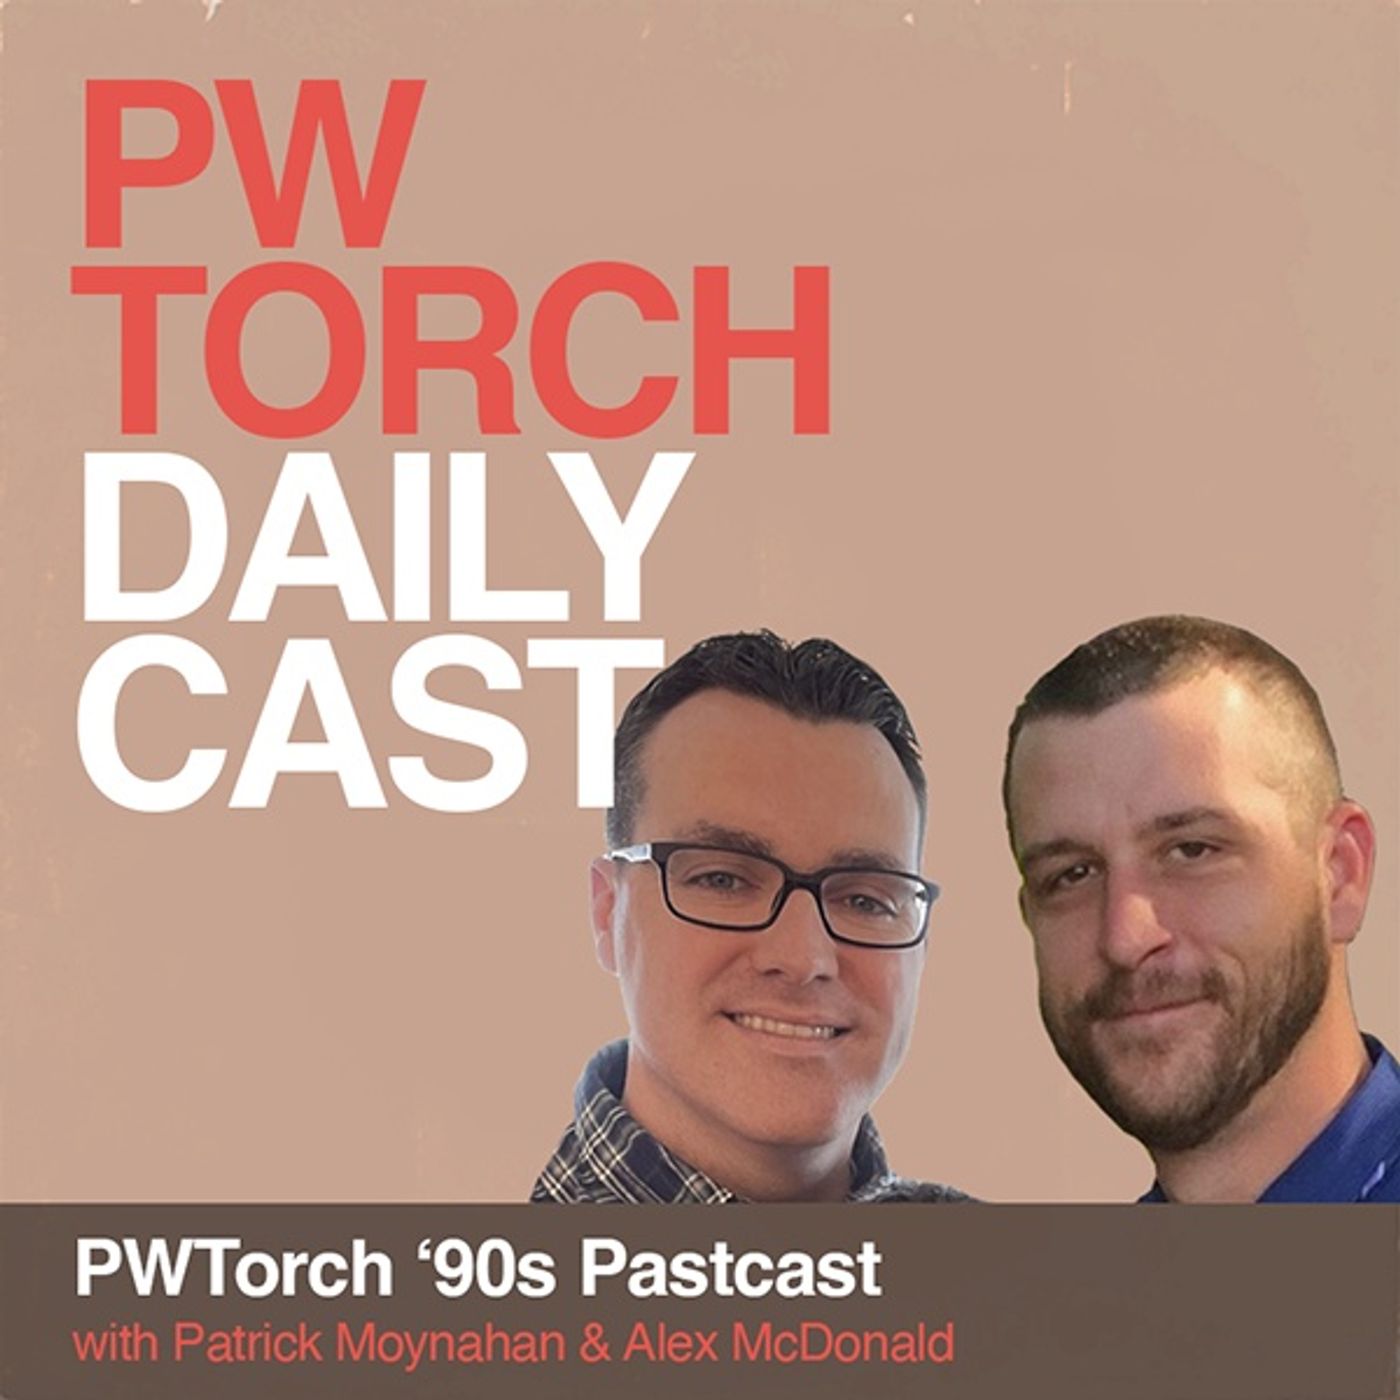 PWTorch ‘90s Pastcast - Moynahan & McDonald discuss issue #265 (2-5-94) of the PWTorch including Clash of the Champions 26 review, more